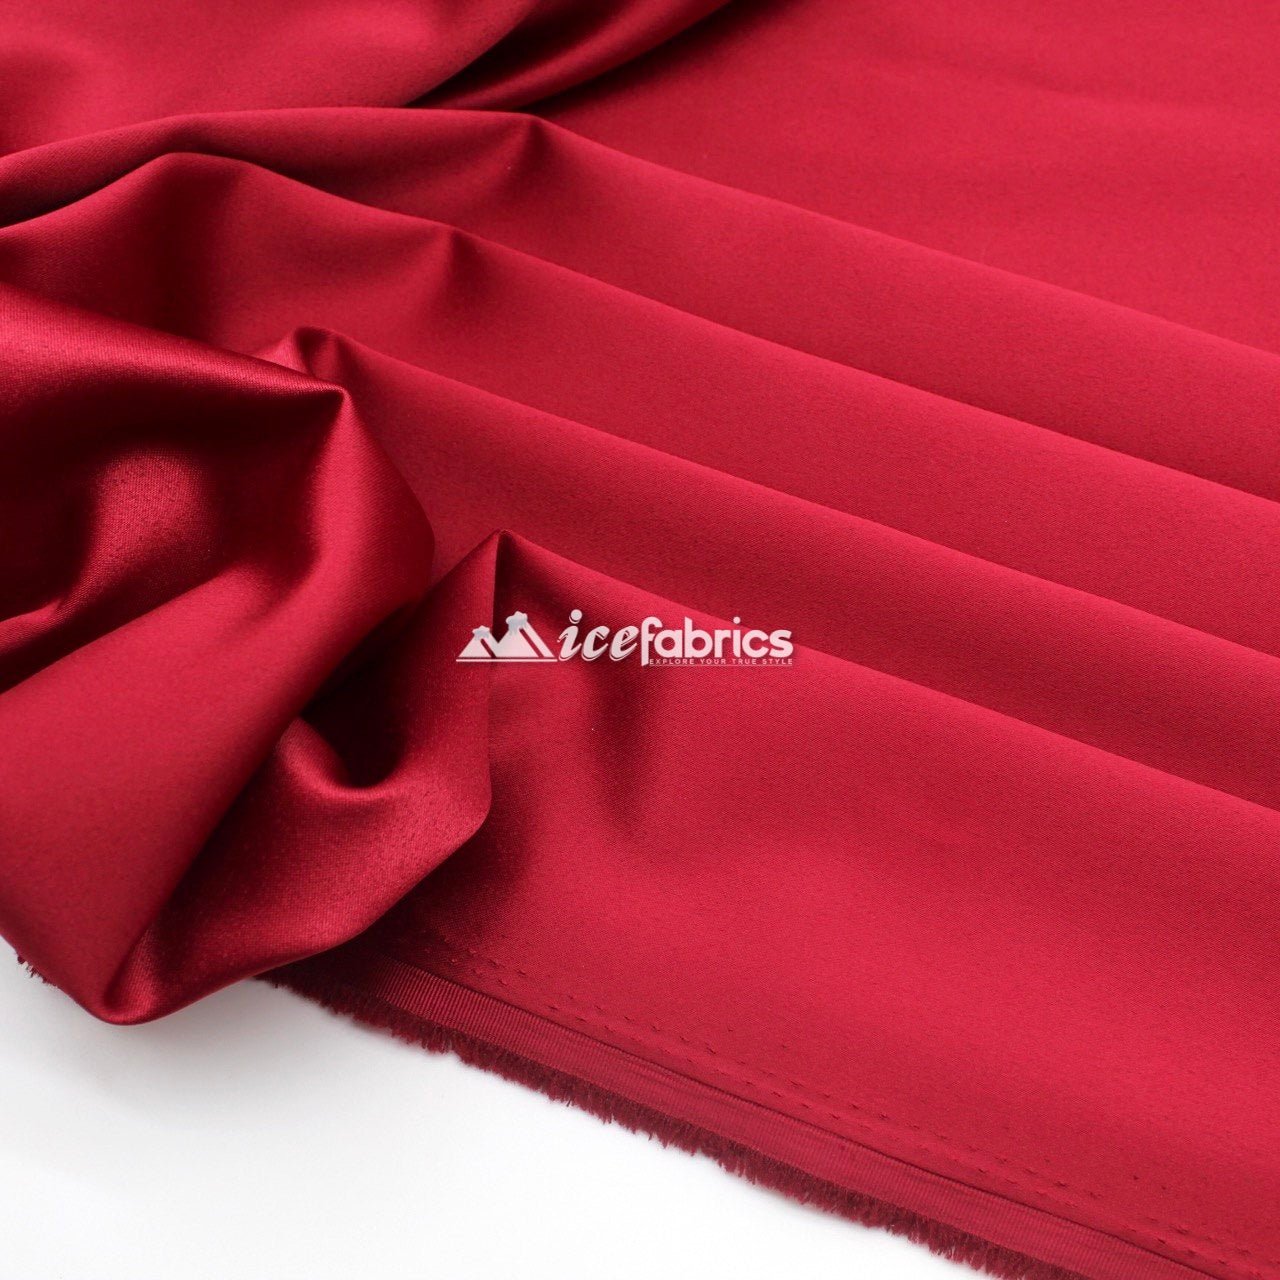 Armani Thick Solid Color Silky Stretch Satin Fabric Sold By The YardSatin FabricICE FABRICSICE FABRICSNavy BlueArmani Thick Solid Color Silky Stretch Satin Fabric Sold By The Yard ICE FABRICS Red